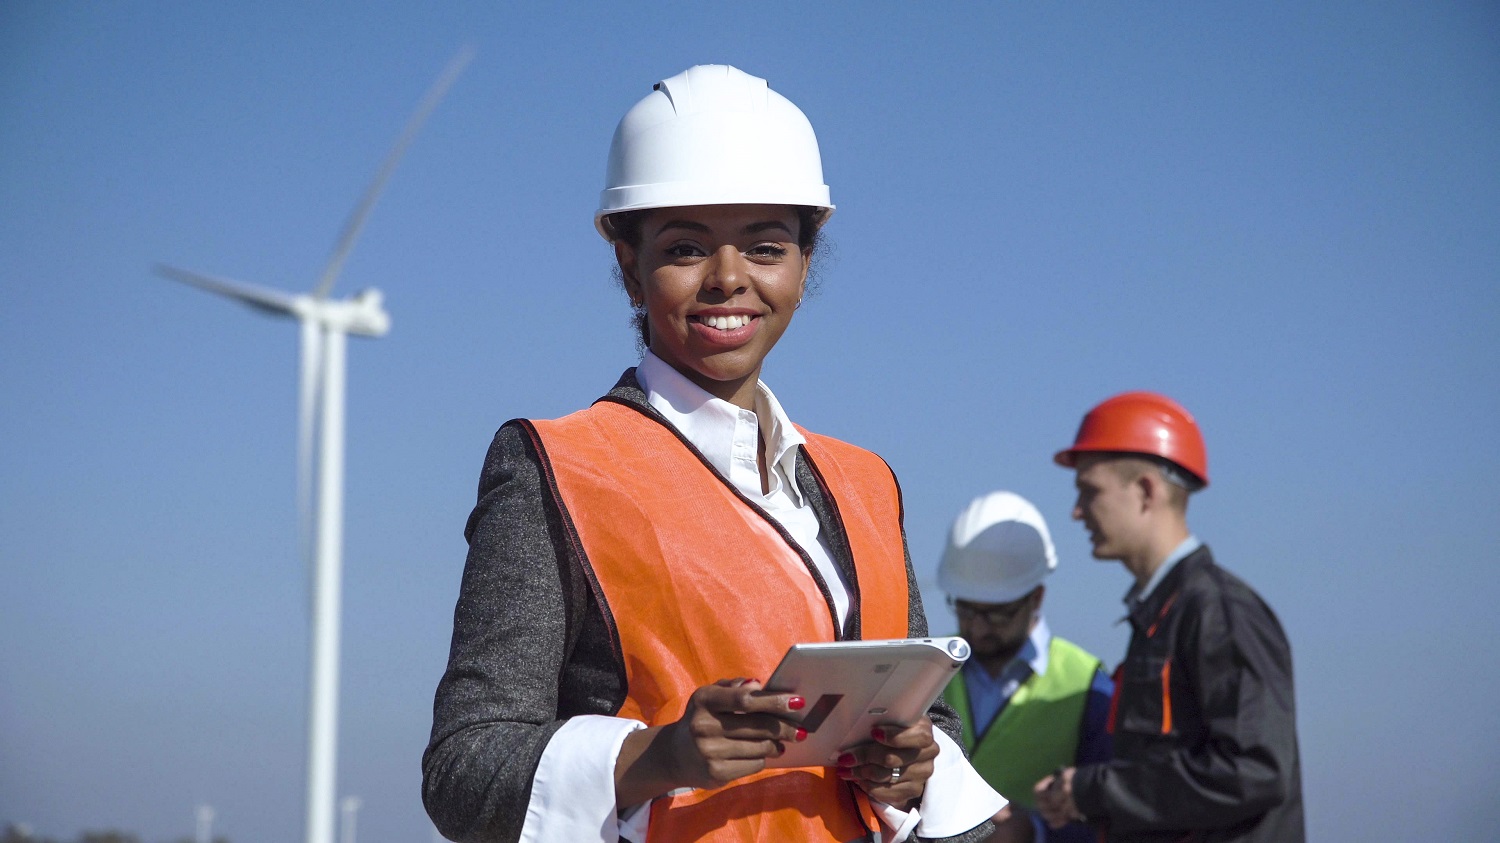 Woman with protective helmet against wind turbine 